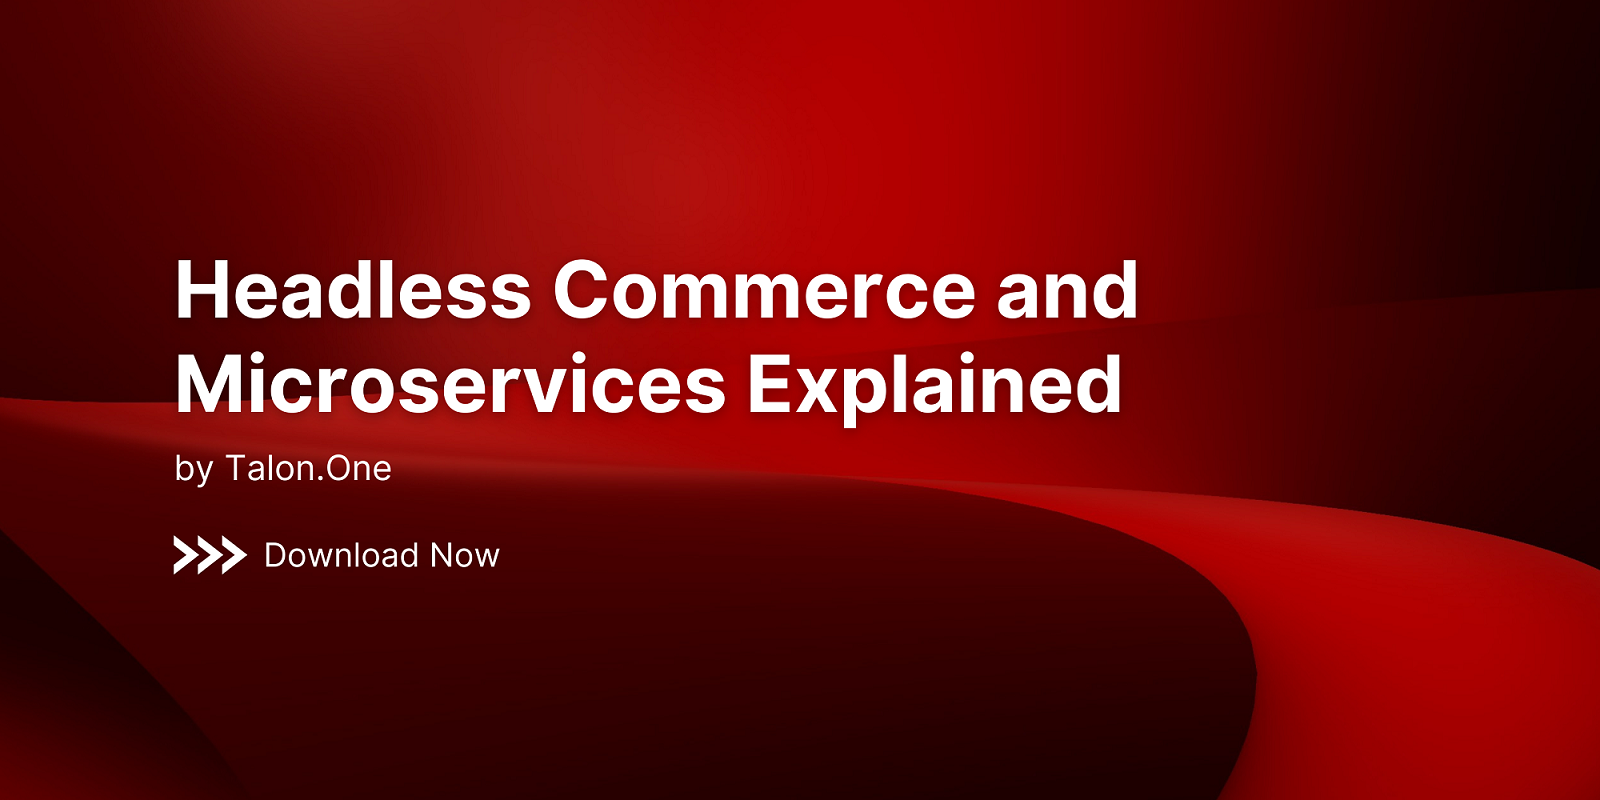 Headless Commerce and Microservices Explained